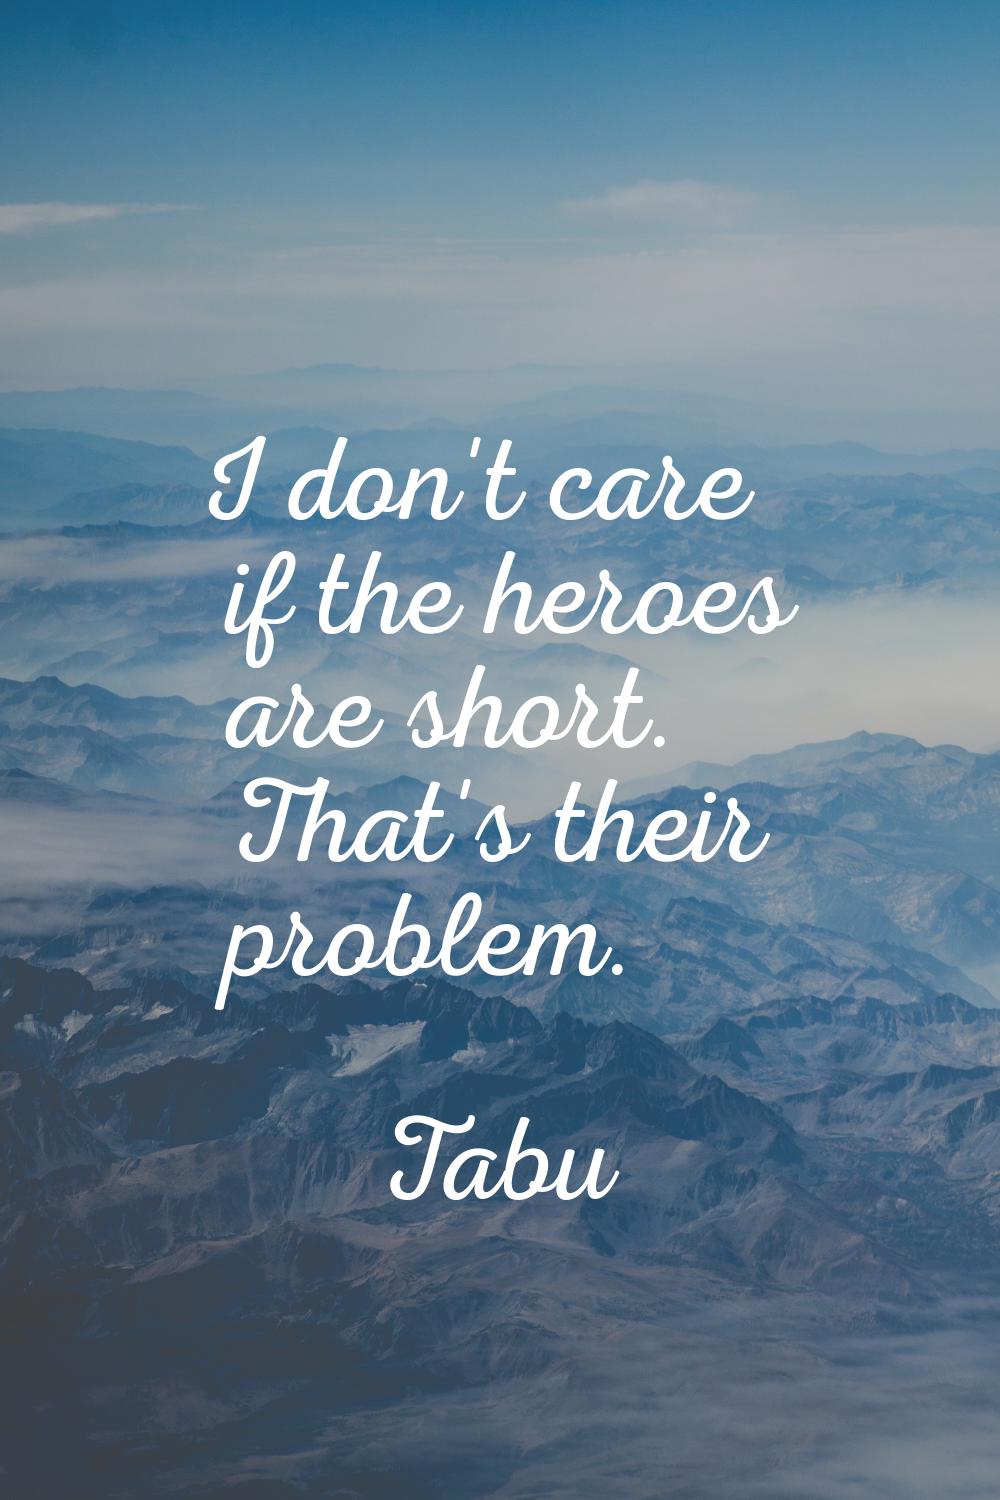 I don't care if the heroes are short. That's their problem.